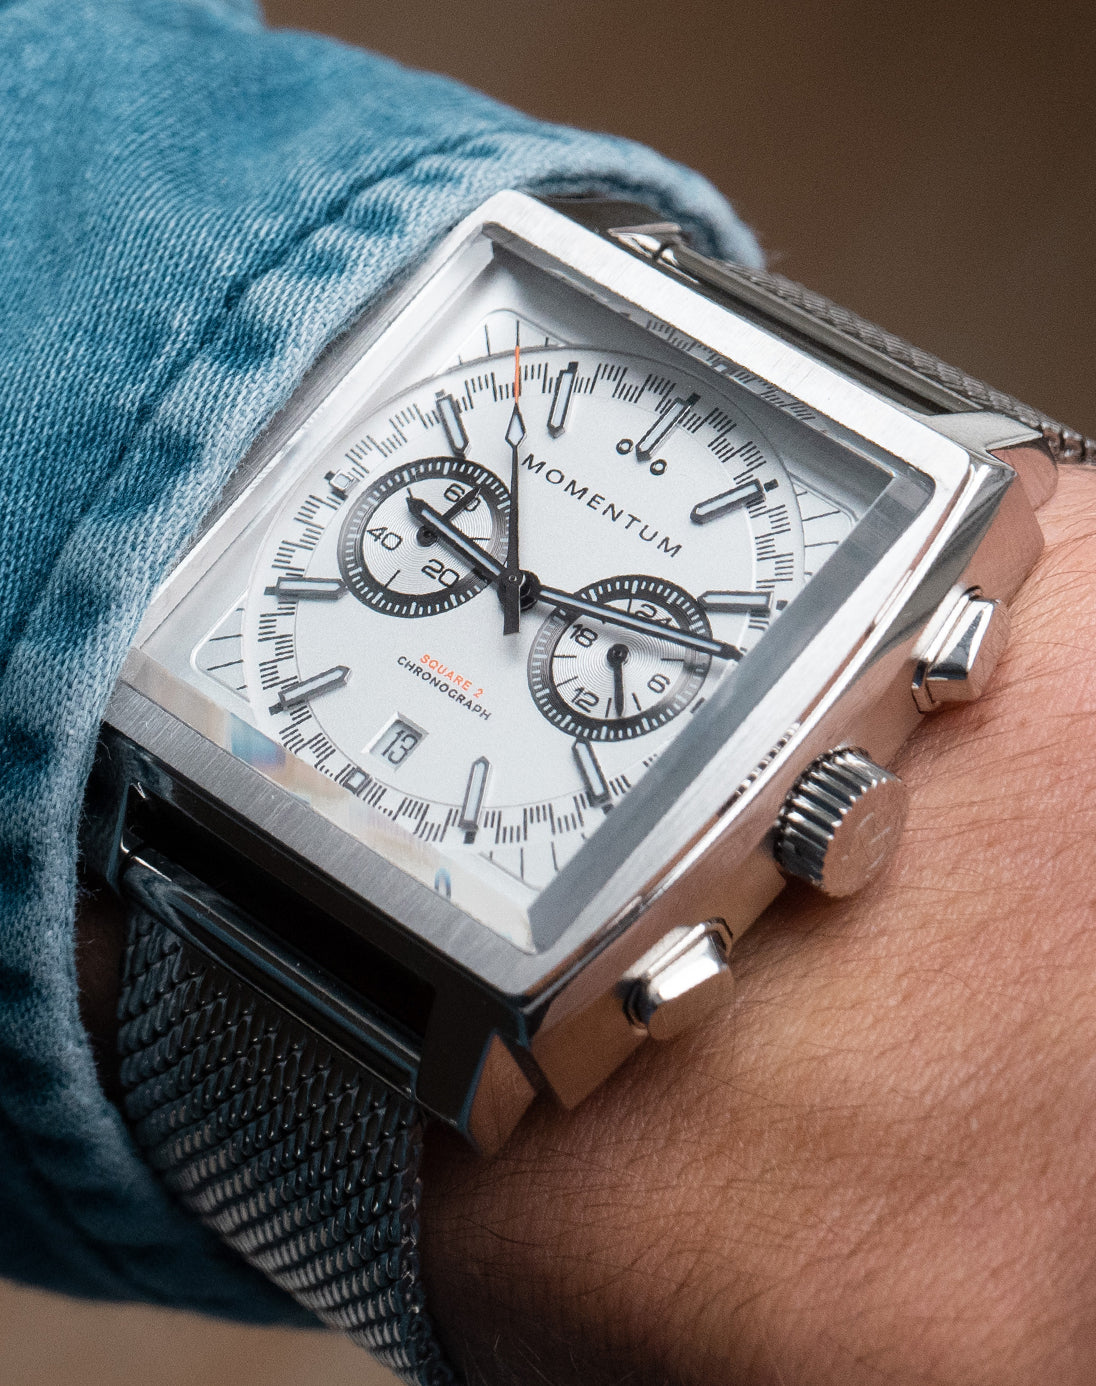 Square Watches Watch Dress Chronograph Momentum | – | Chronograph Momentum 2